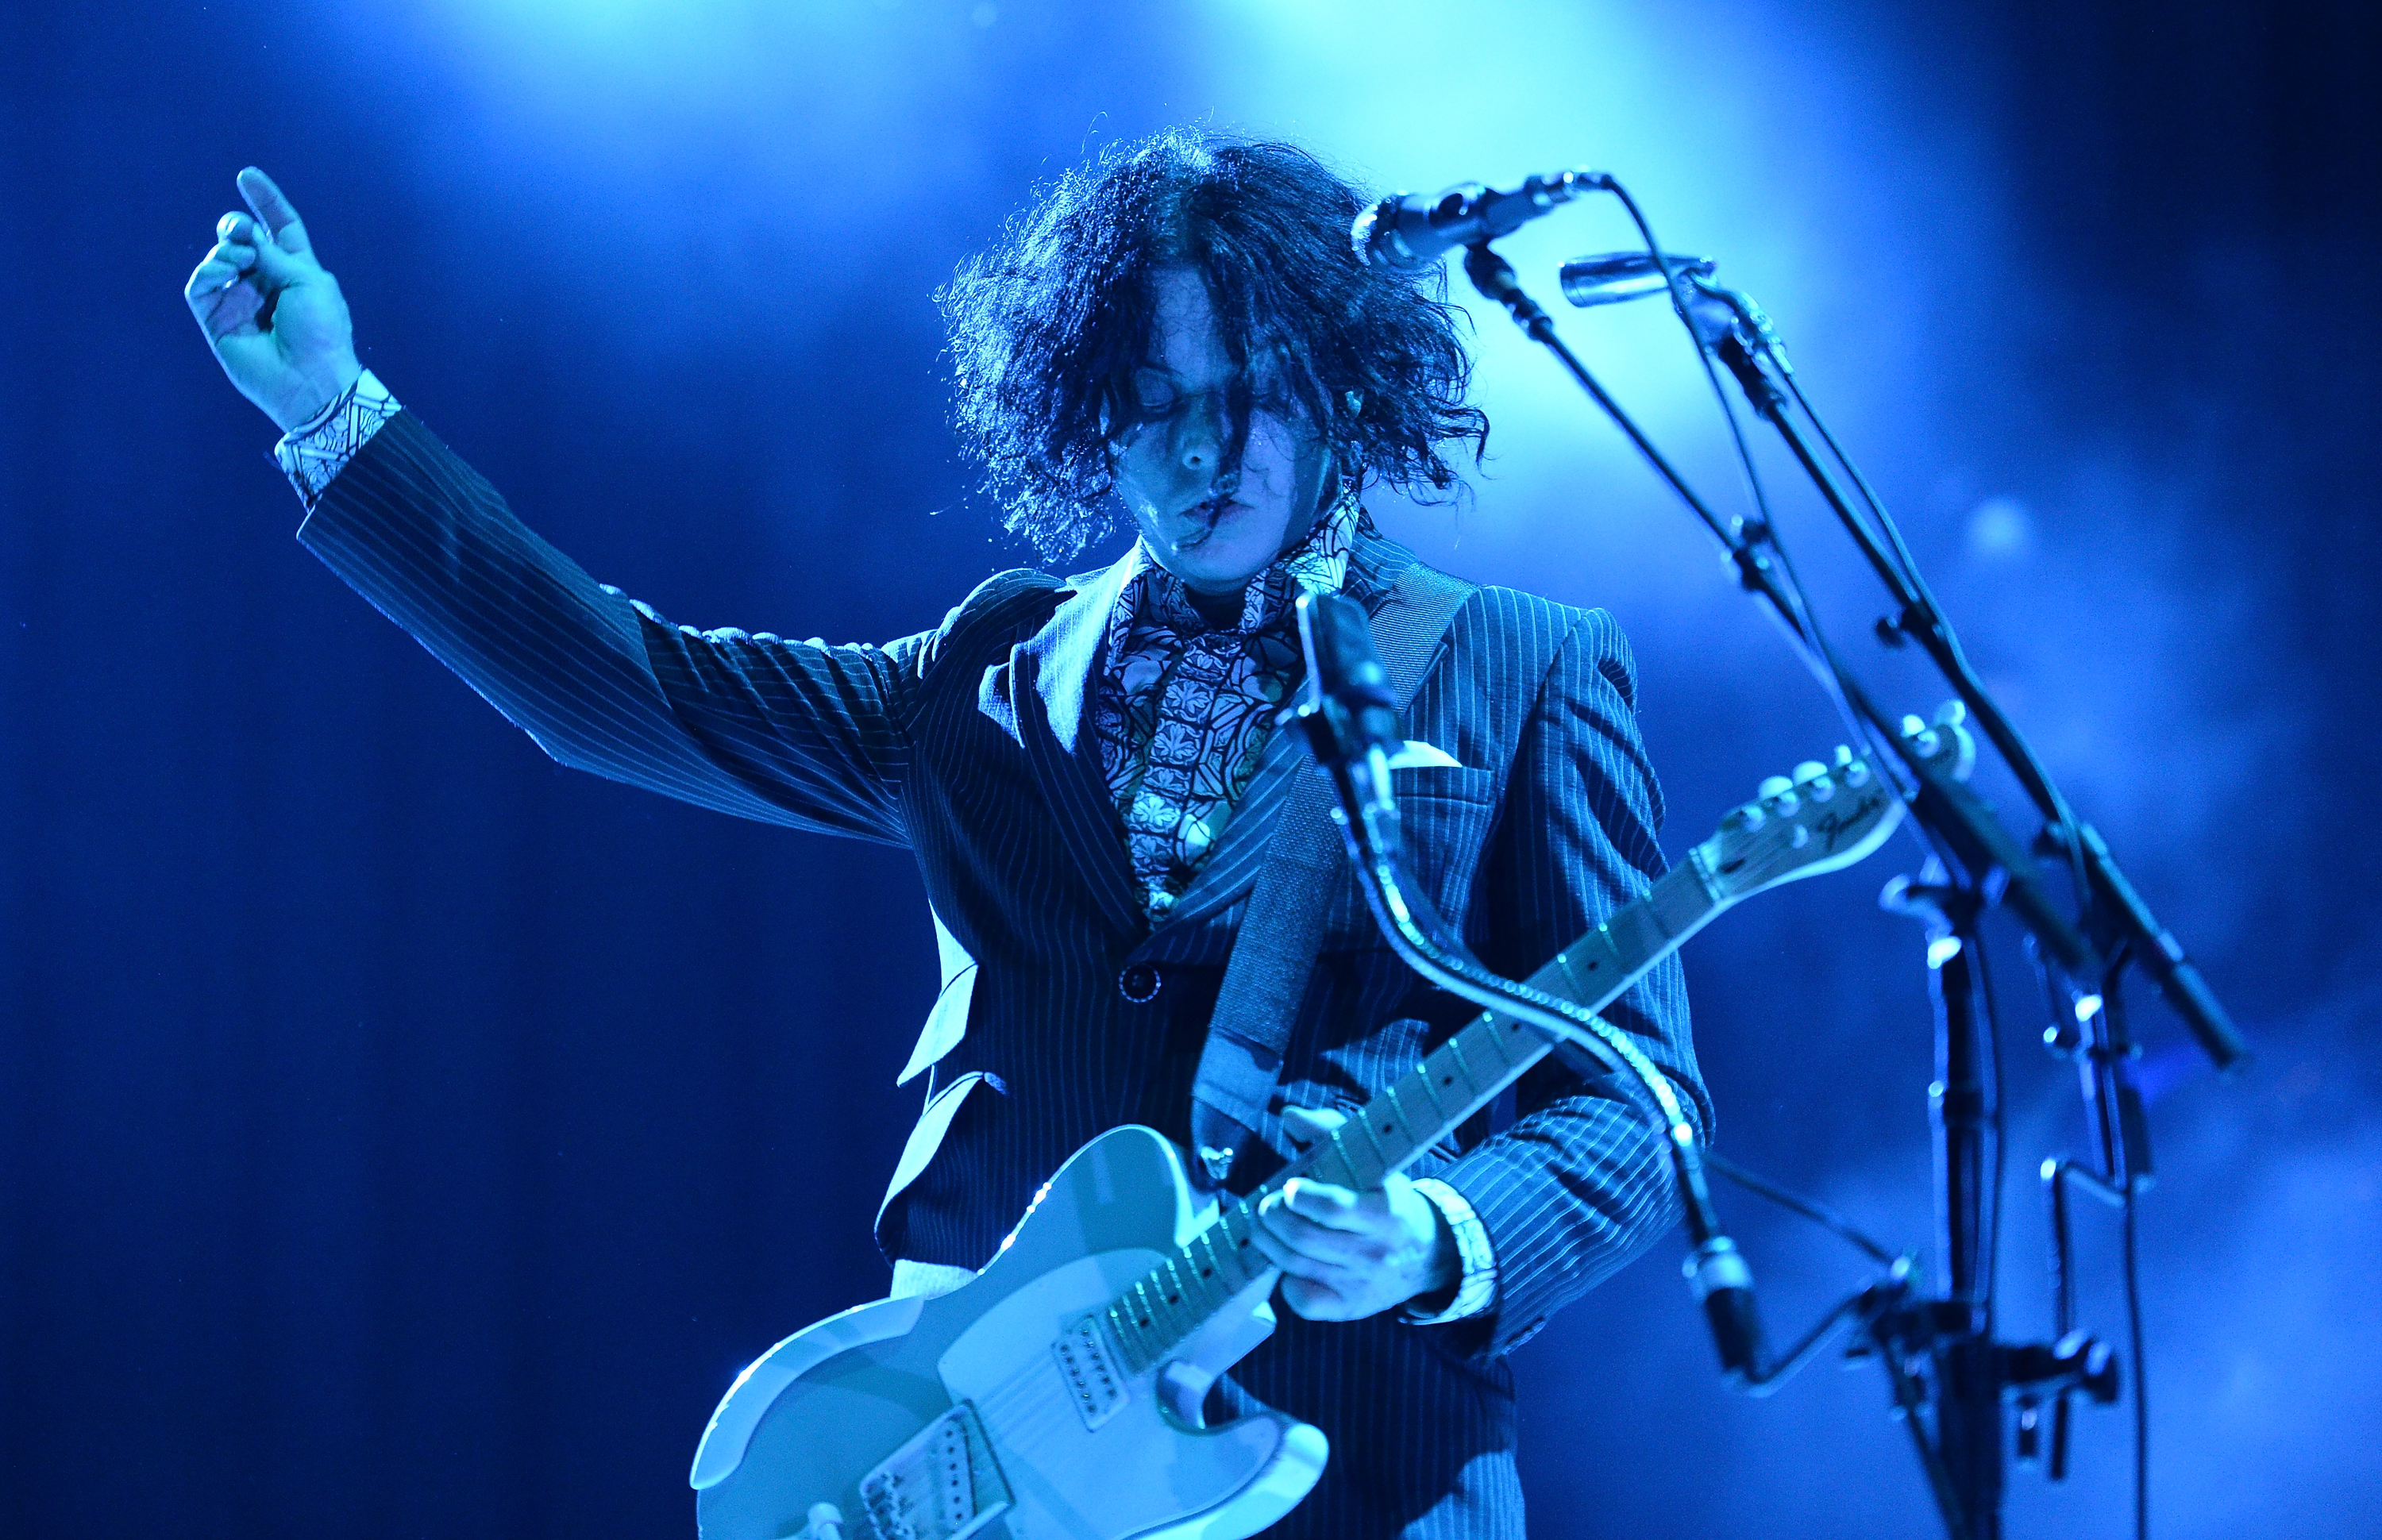 MANCHESTER, TN - JUNE 14: Singer Jack White performs during the 2014 Bonnaroo Music & Arts Festival on June 14, 2014 in Manchester, Tennessee. (Photo by Jason Merritt/Getty Images)